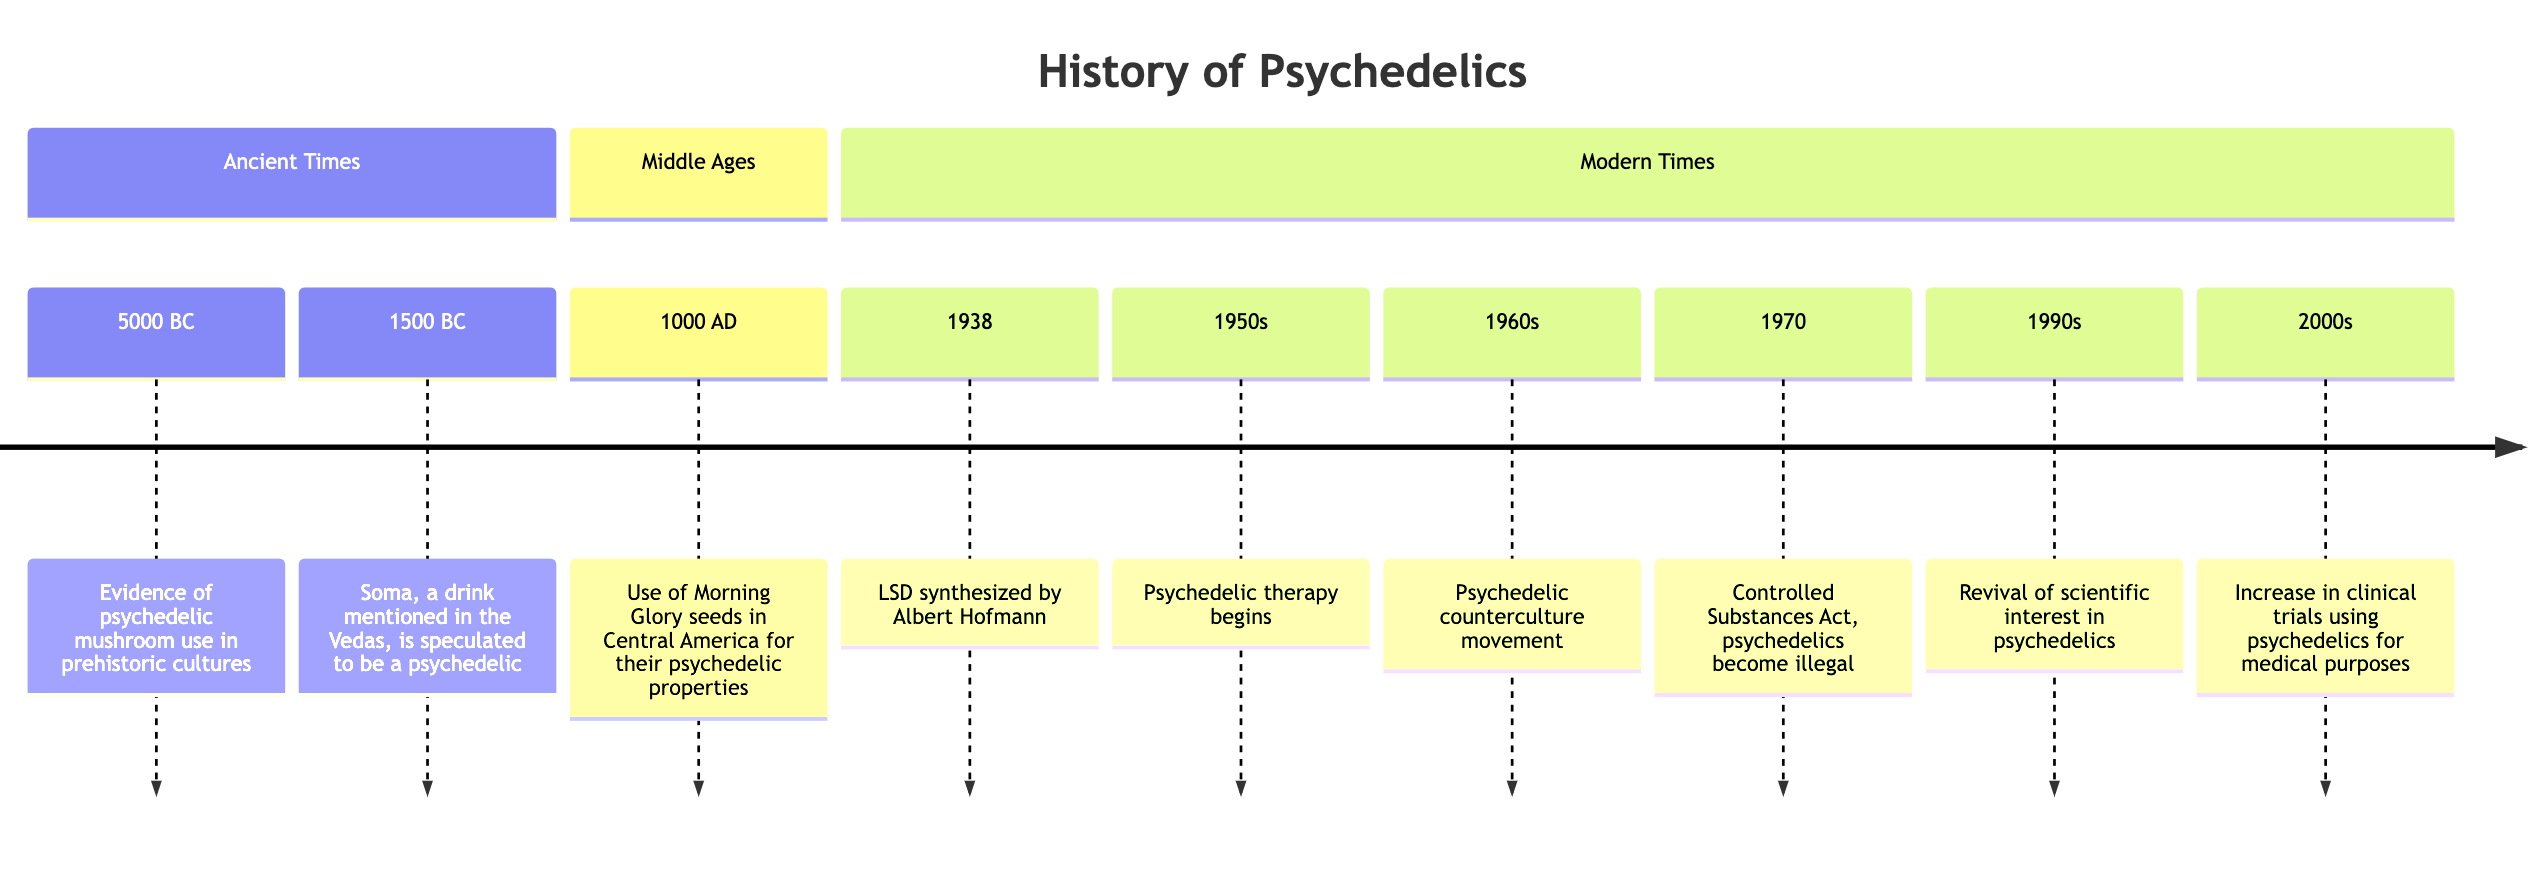 Psychedelics History